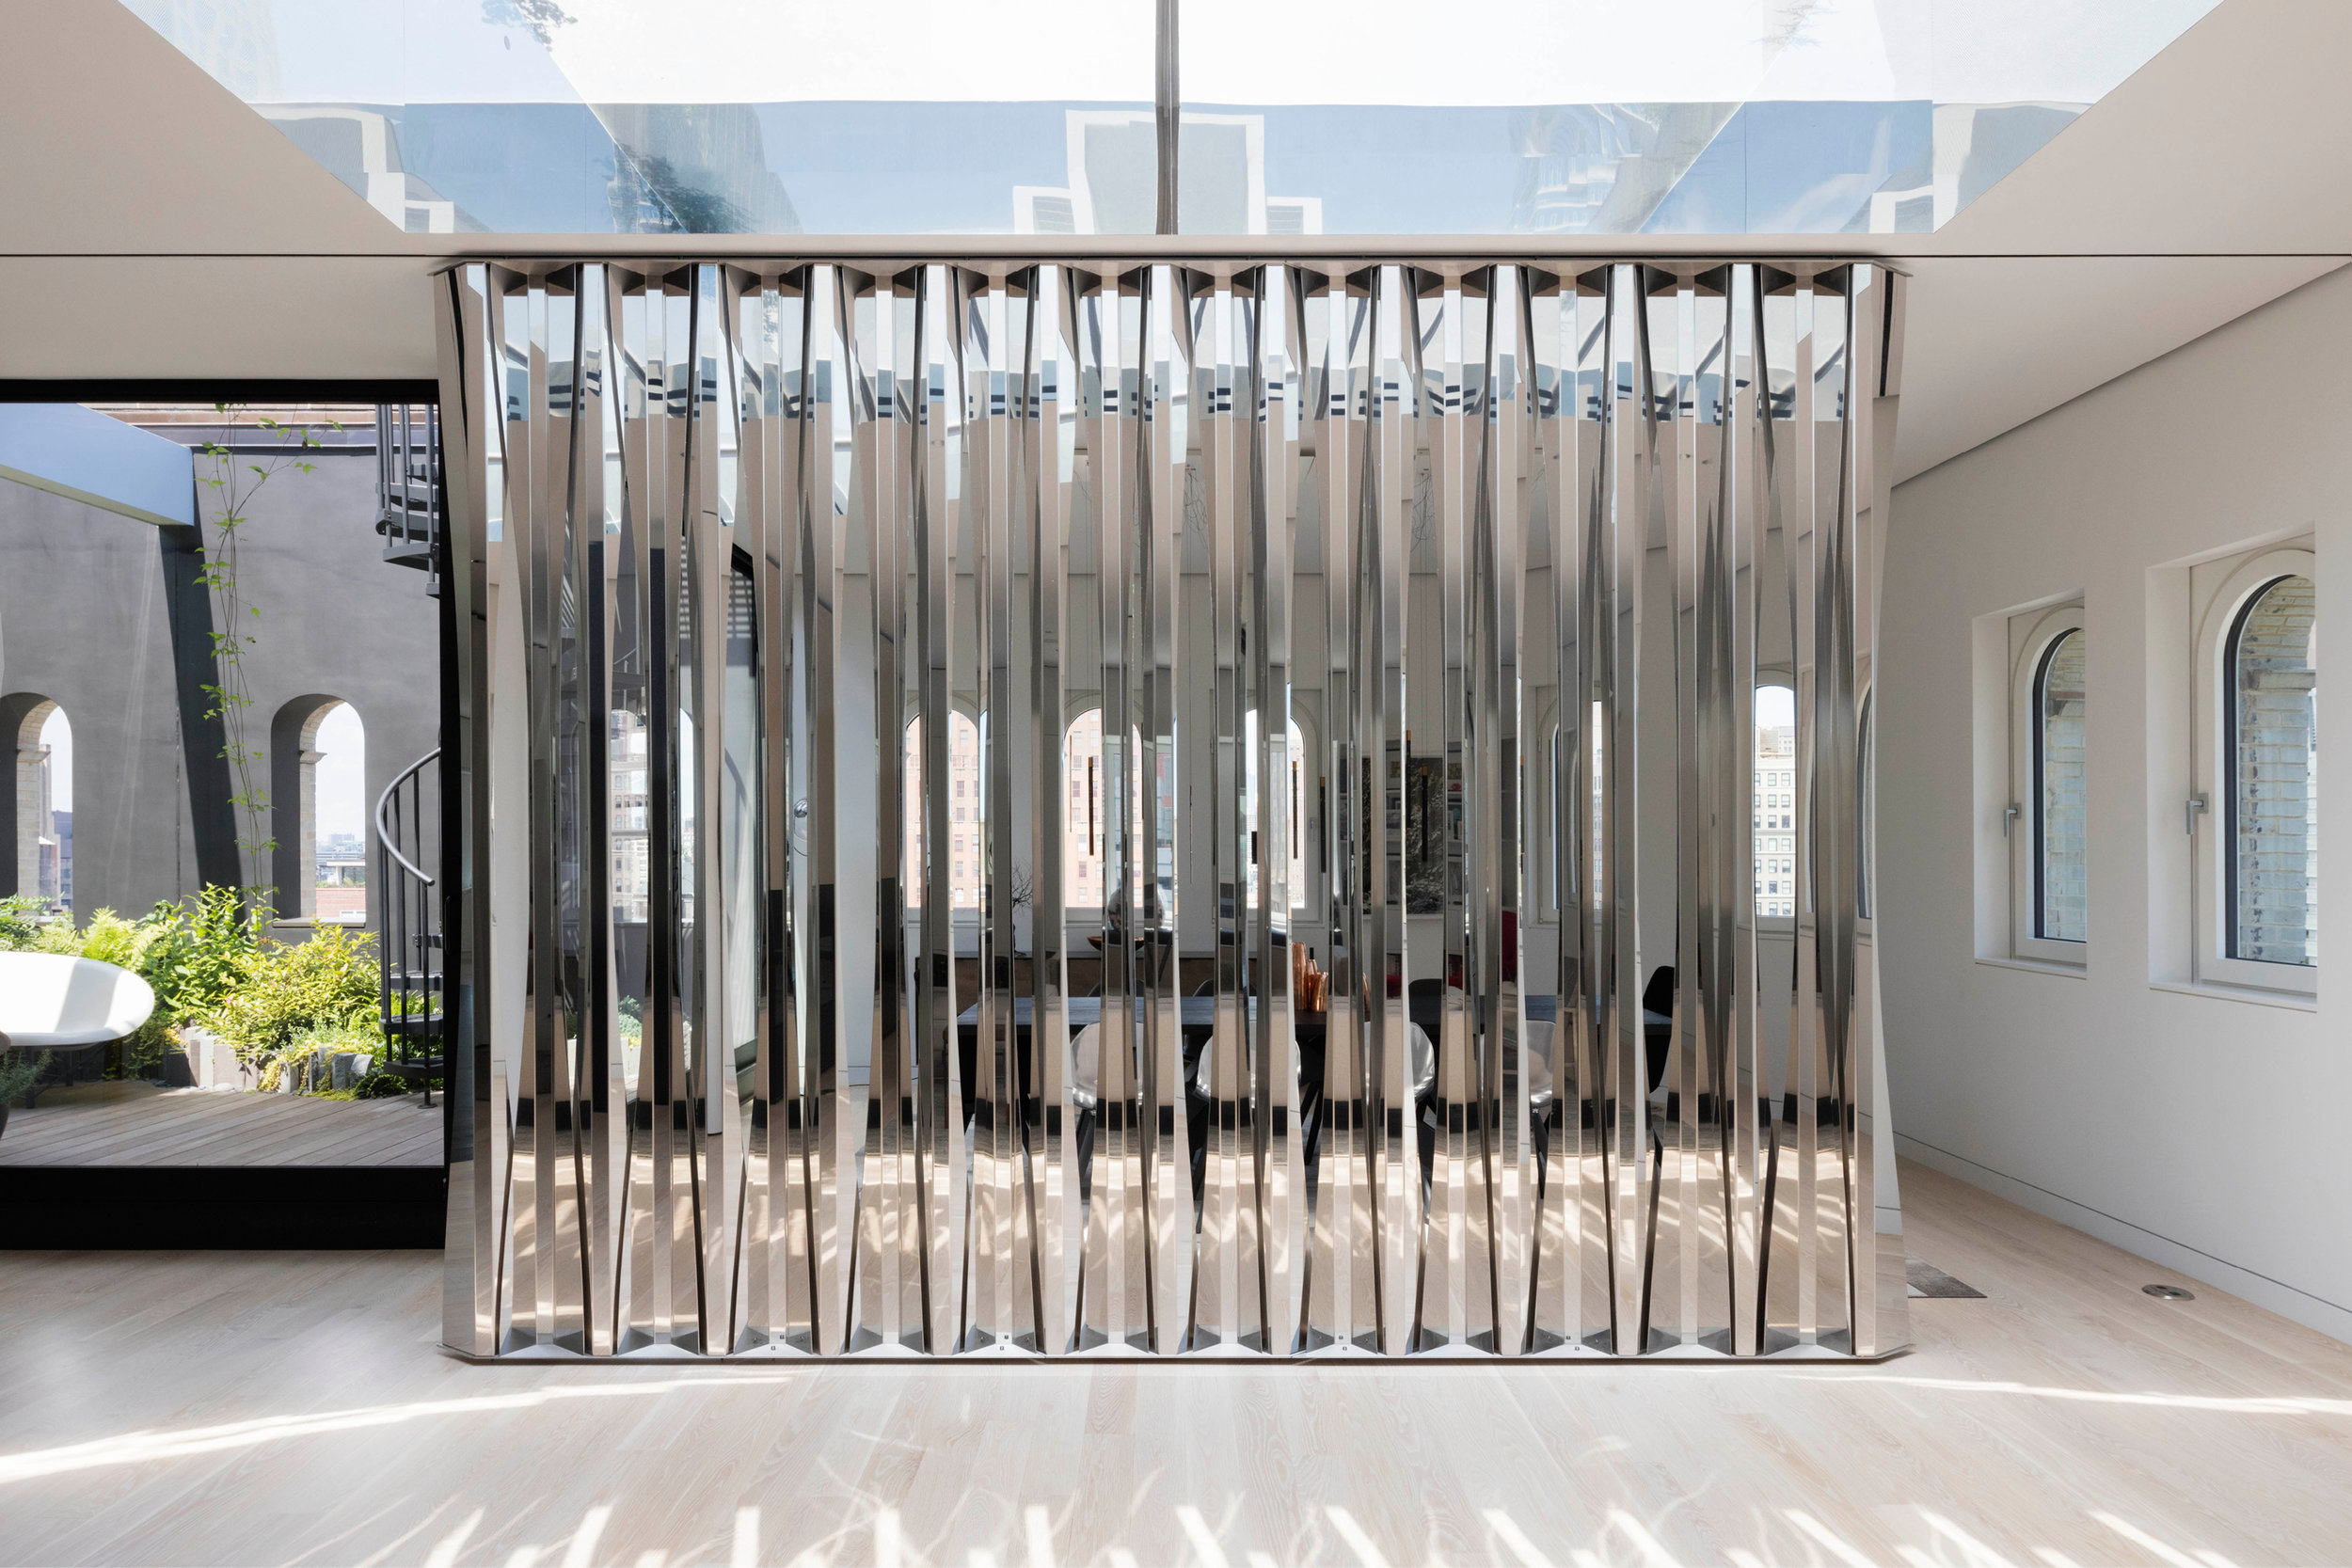 Faced stainless steel folding screen offers privacy to the dining room at the Gerken Loft, designed by Young Projects